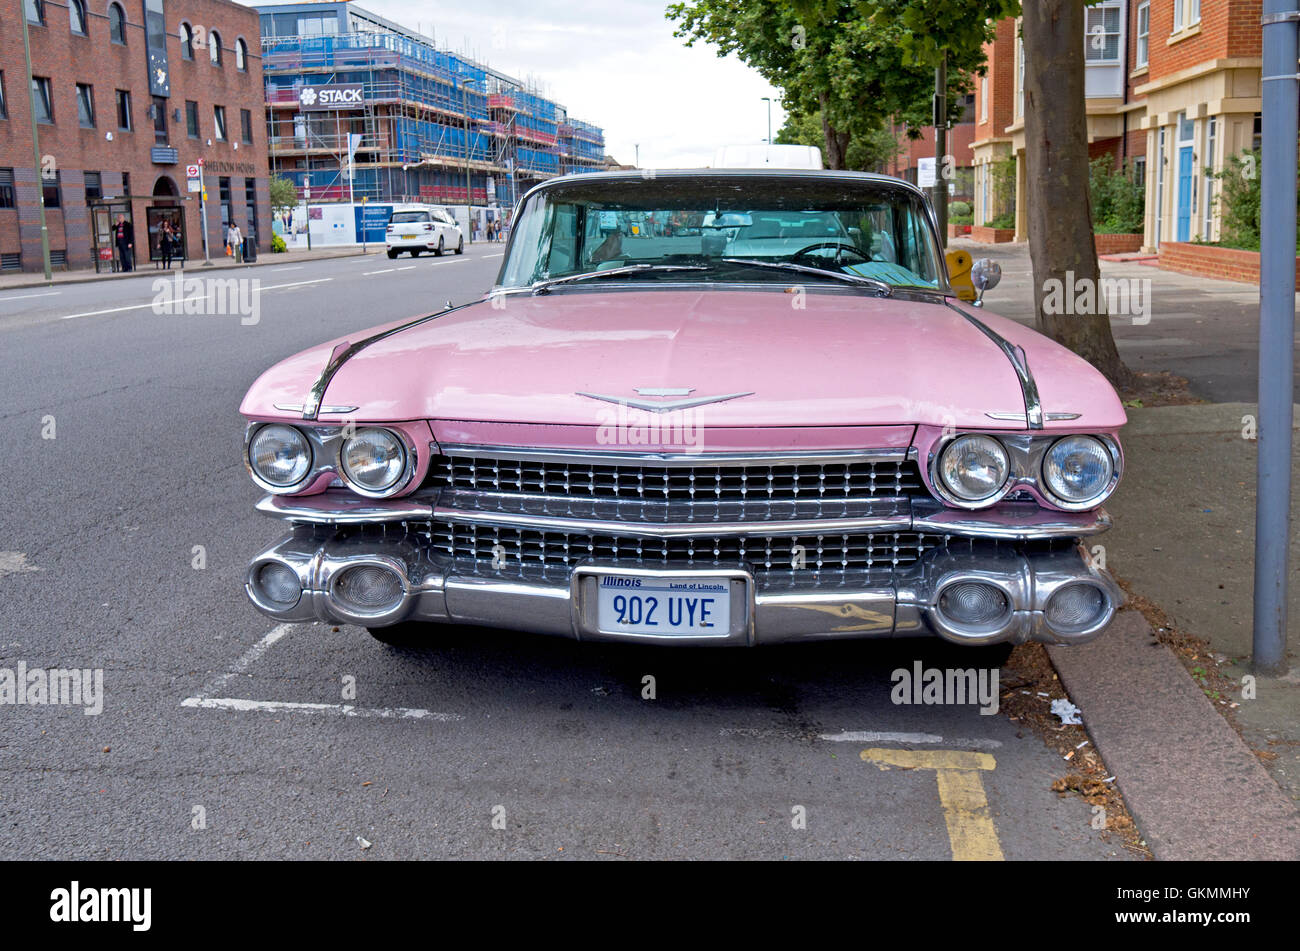 1959 Pink Cadillac Deville parked in London. Stock Photo